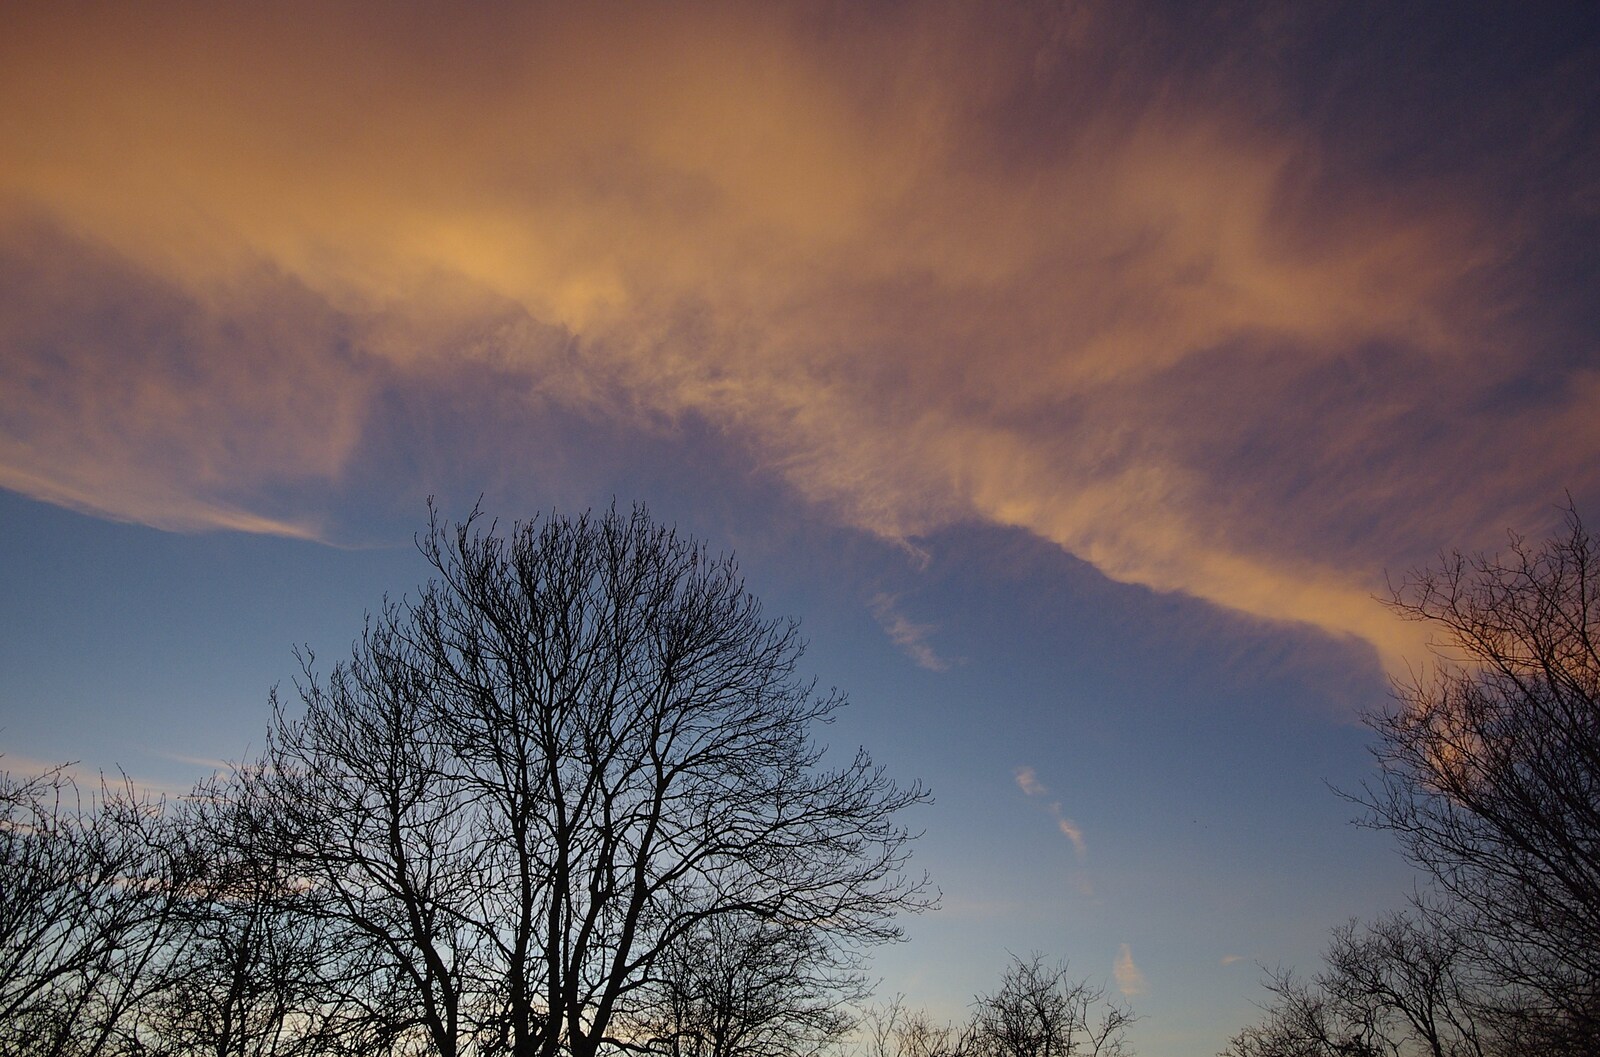 Nice sunset clouds over the ash tree from Organ Practice, Swiss Fondue and Curry With Gov, Thorndon, Cambridge and Diss - 27th January 2008